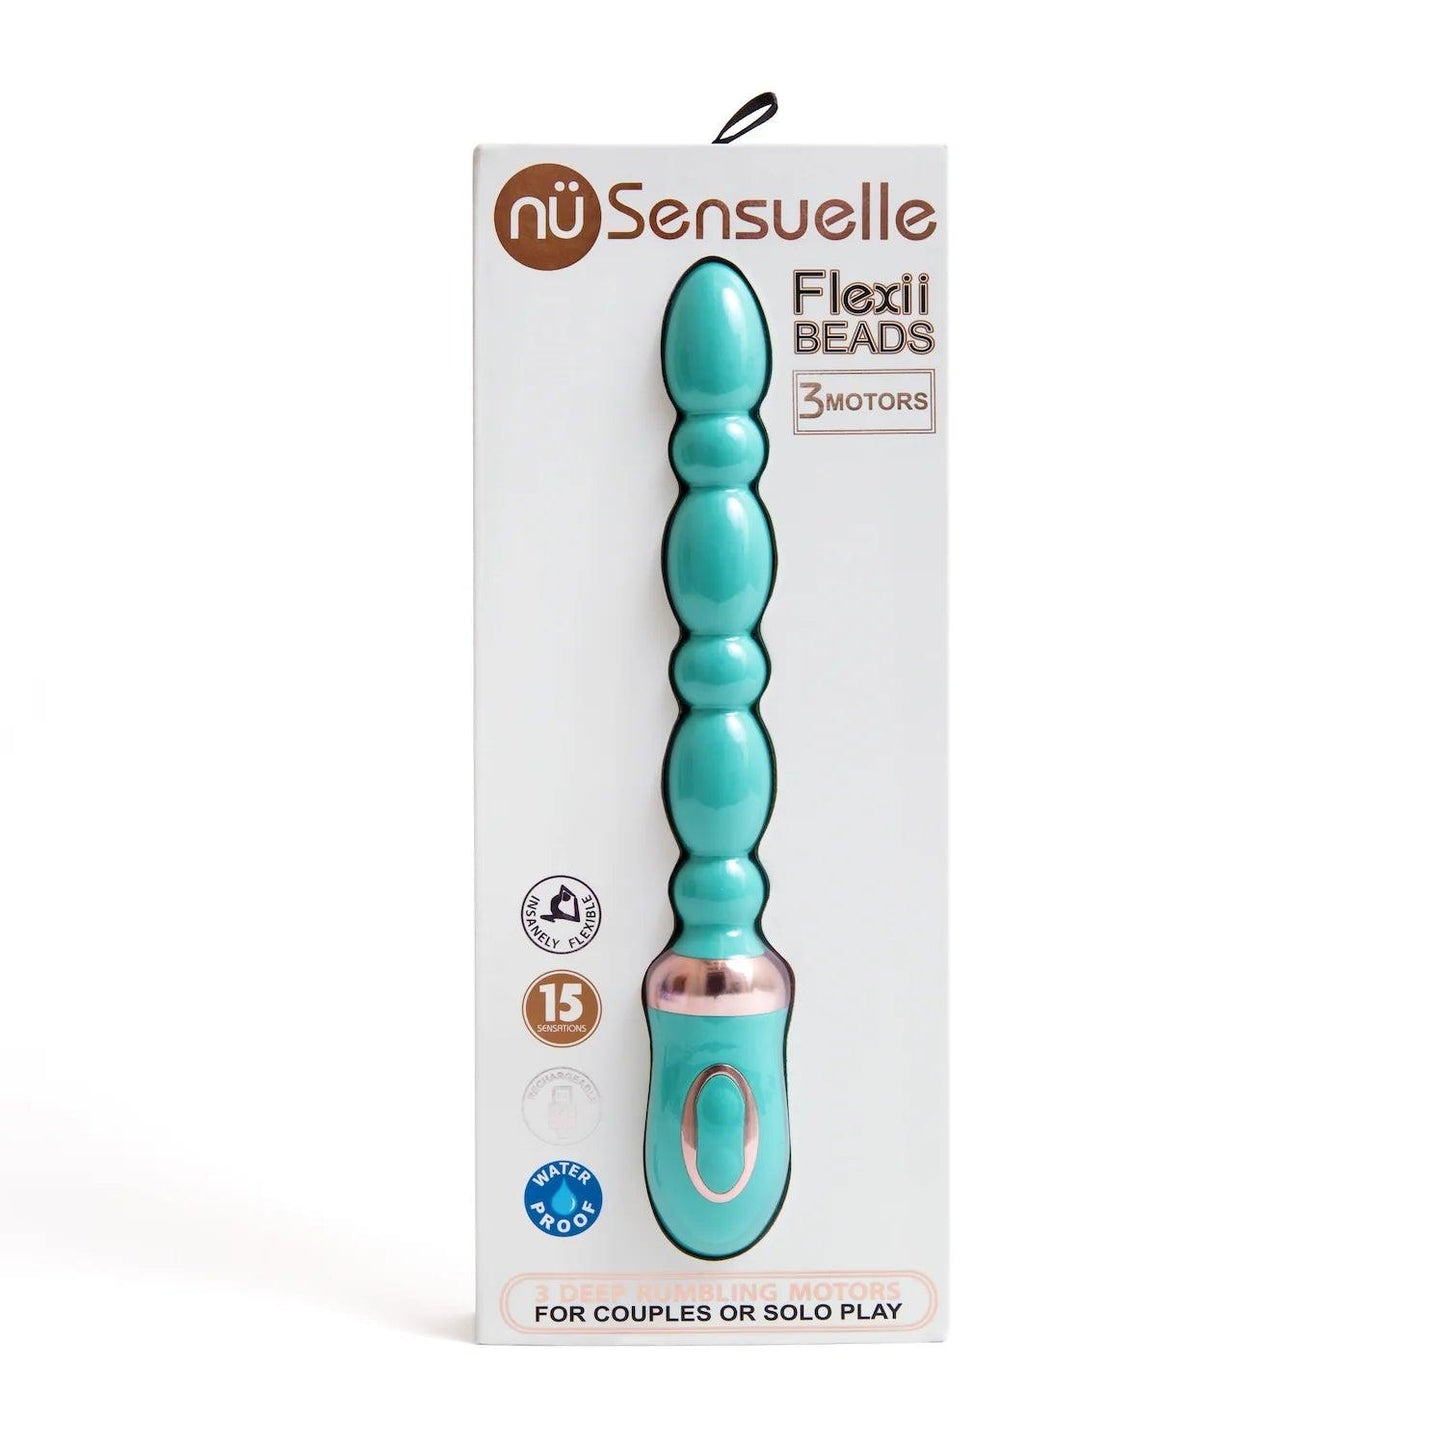 FLEXII Beads - Vibrating Rechargeable Anal Beads by Nu Sensuelle - Boink Adult Boutique www.boinkmuskoka.com Canada